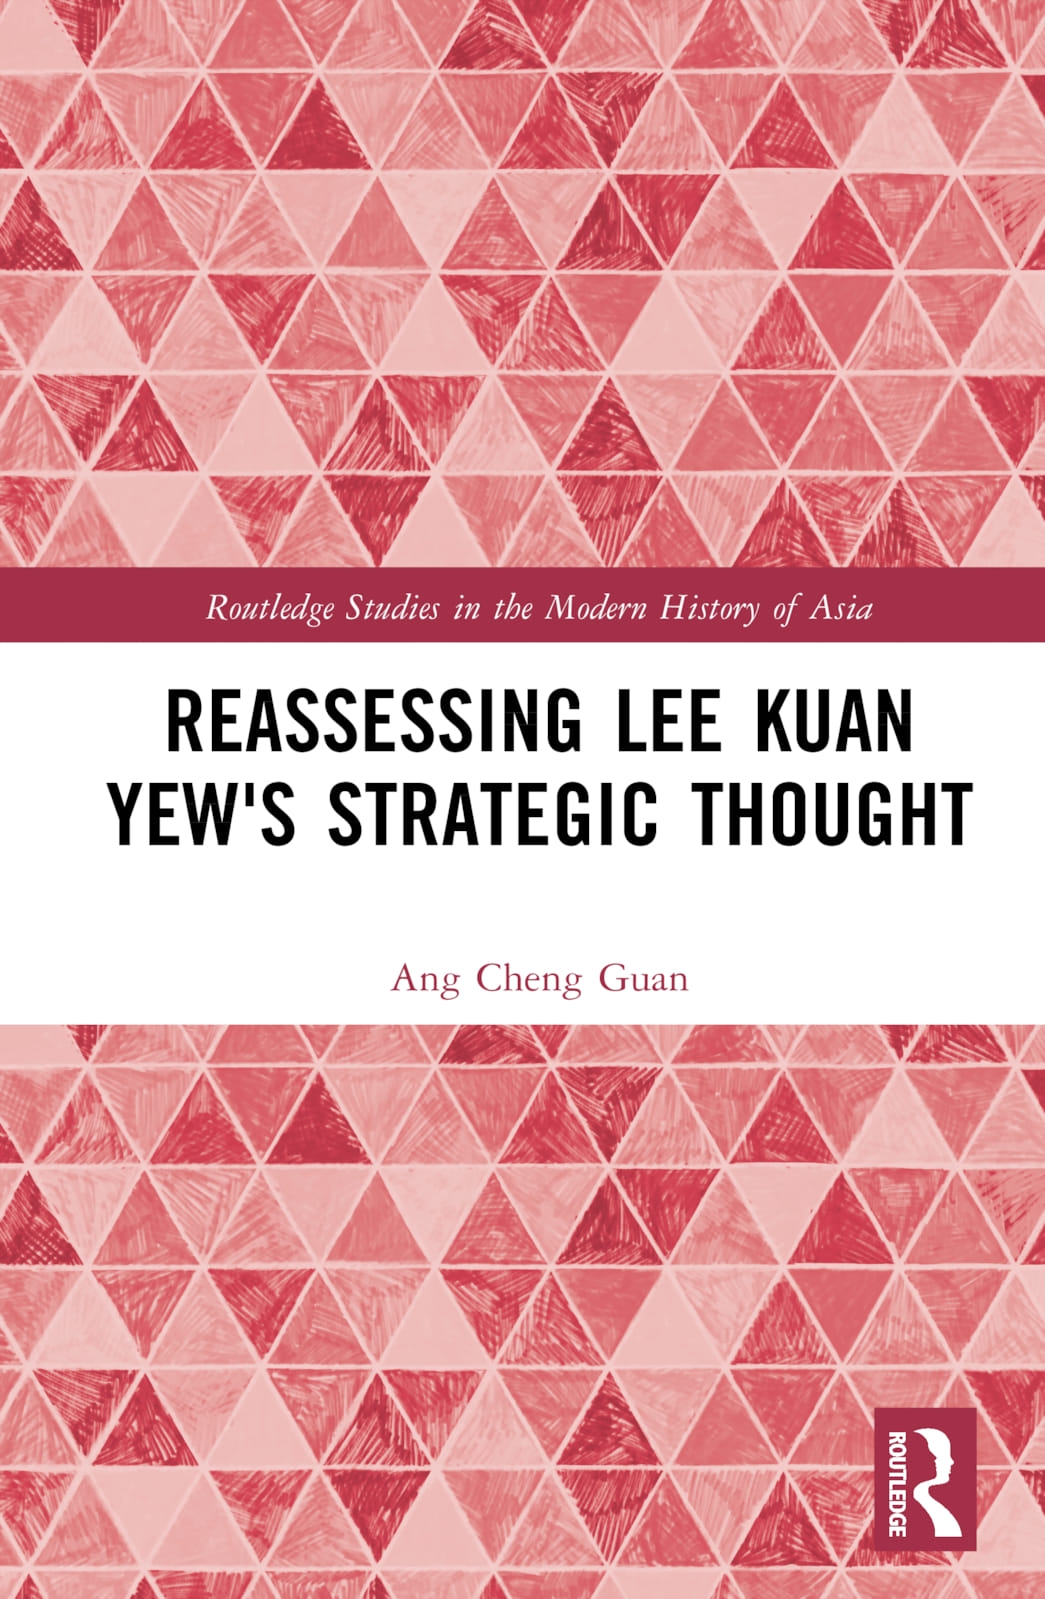 Reassessing Lee Kuan Yew’s Strategic Thought